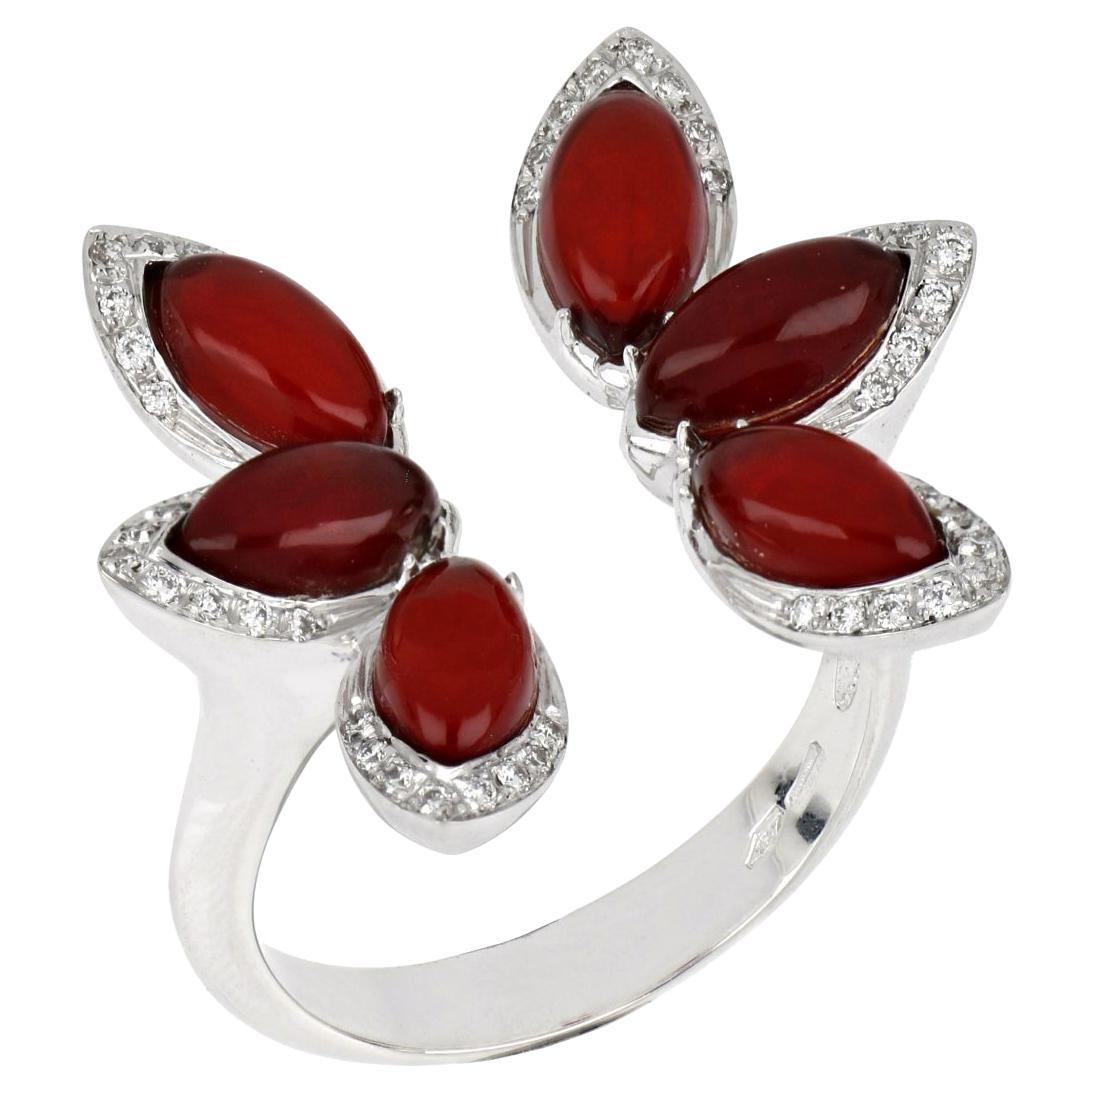 18kt White Gold Les Papillons Rings with Red Aventurine and Diamonds